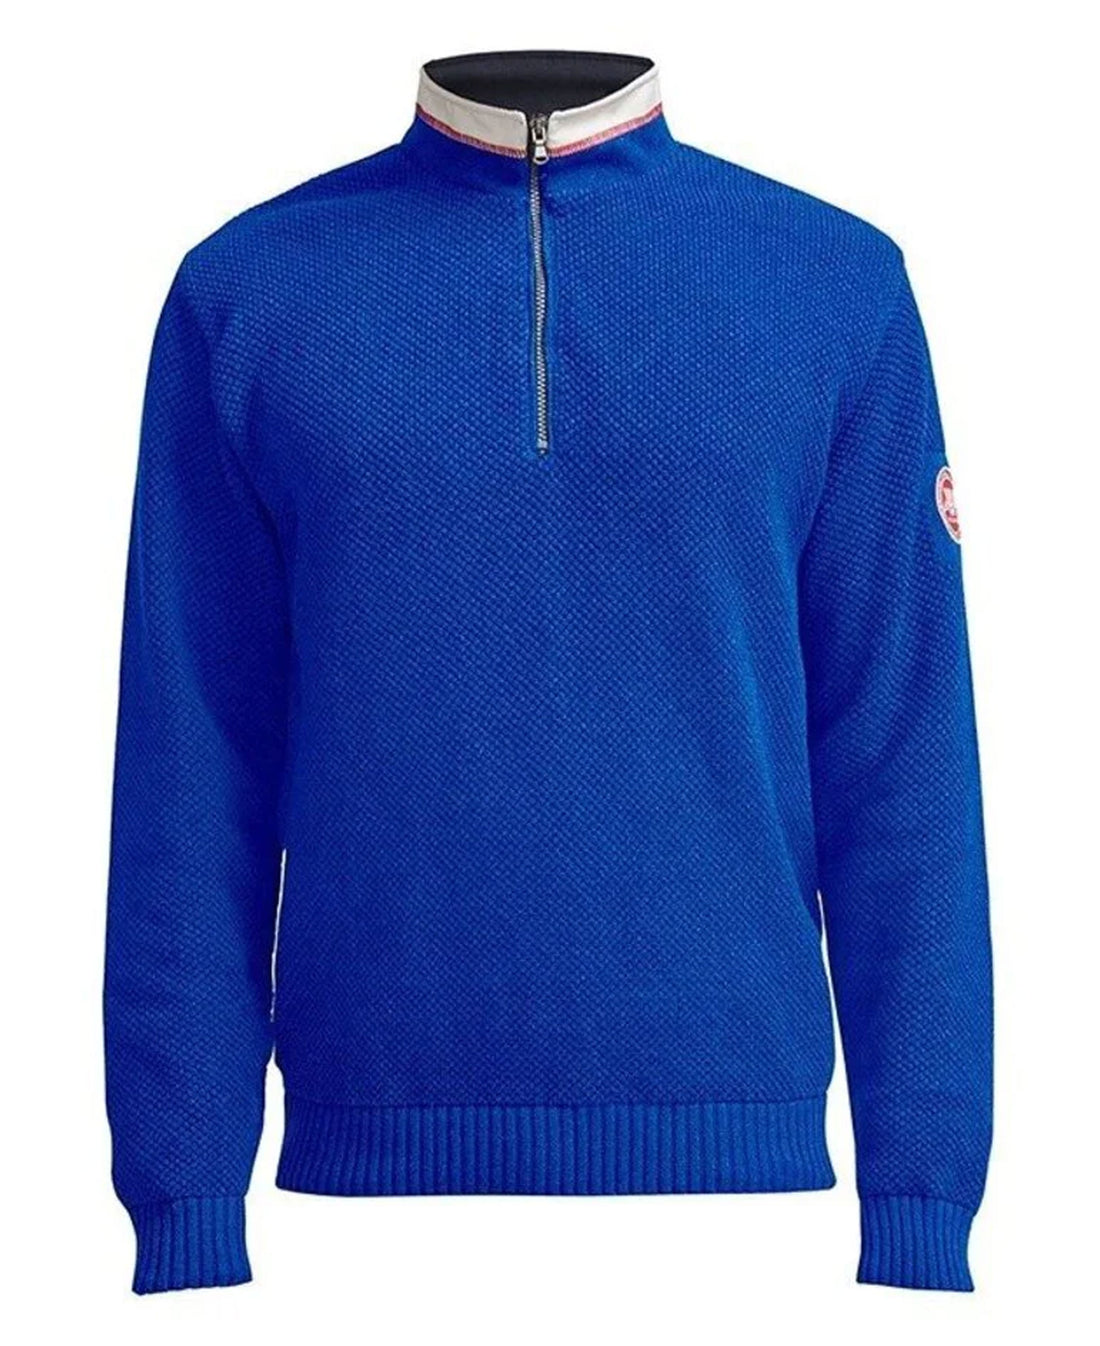 Classic Windproof Sweater - Surf Blue